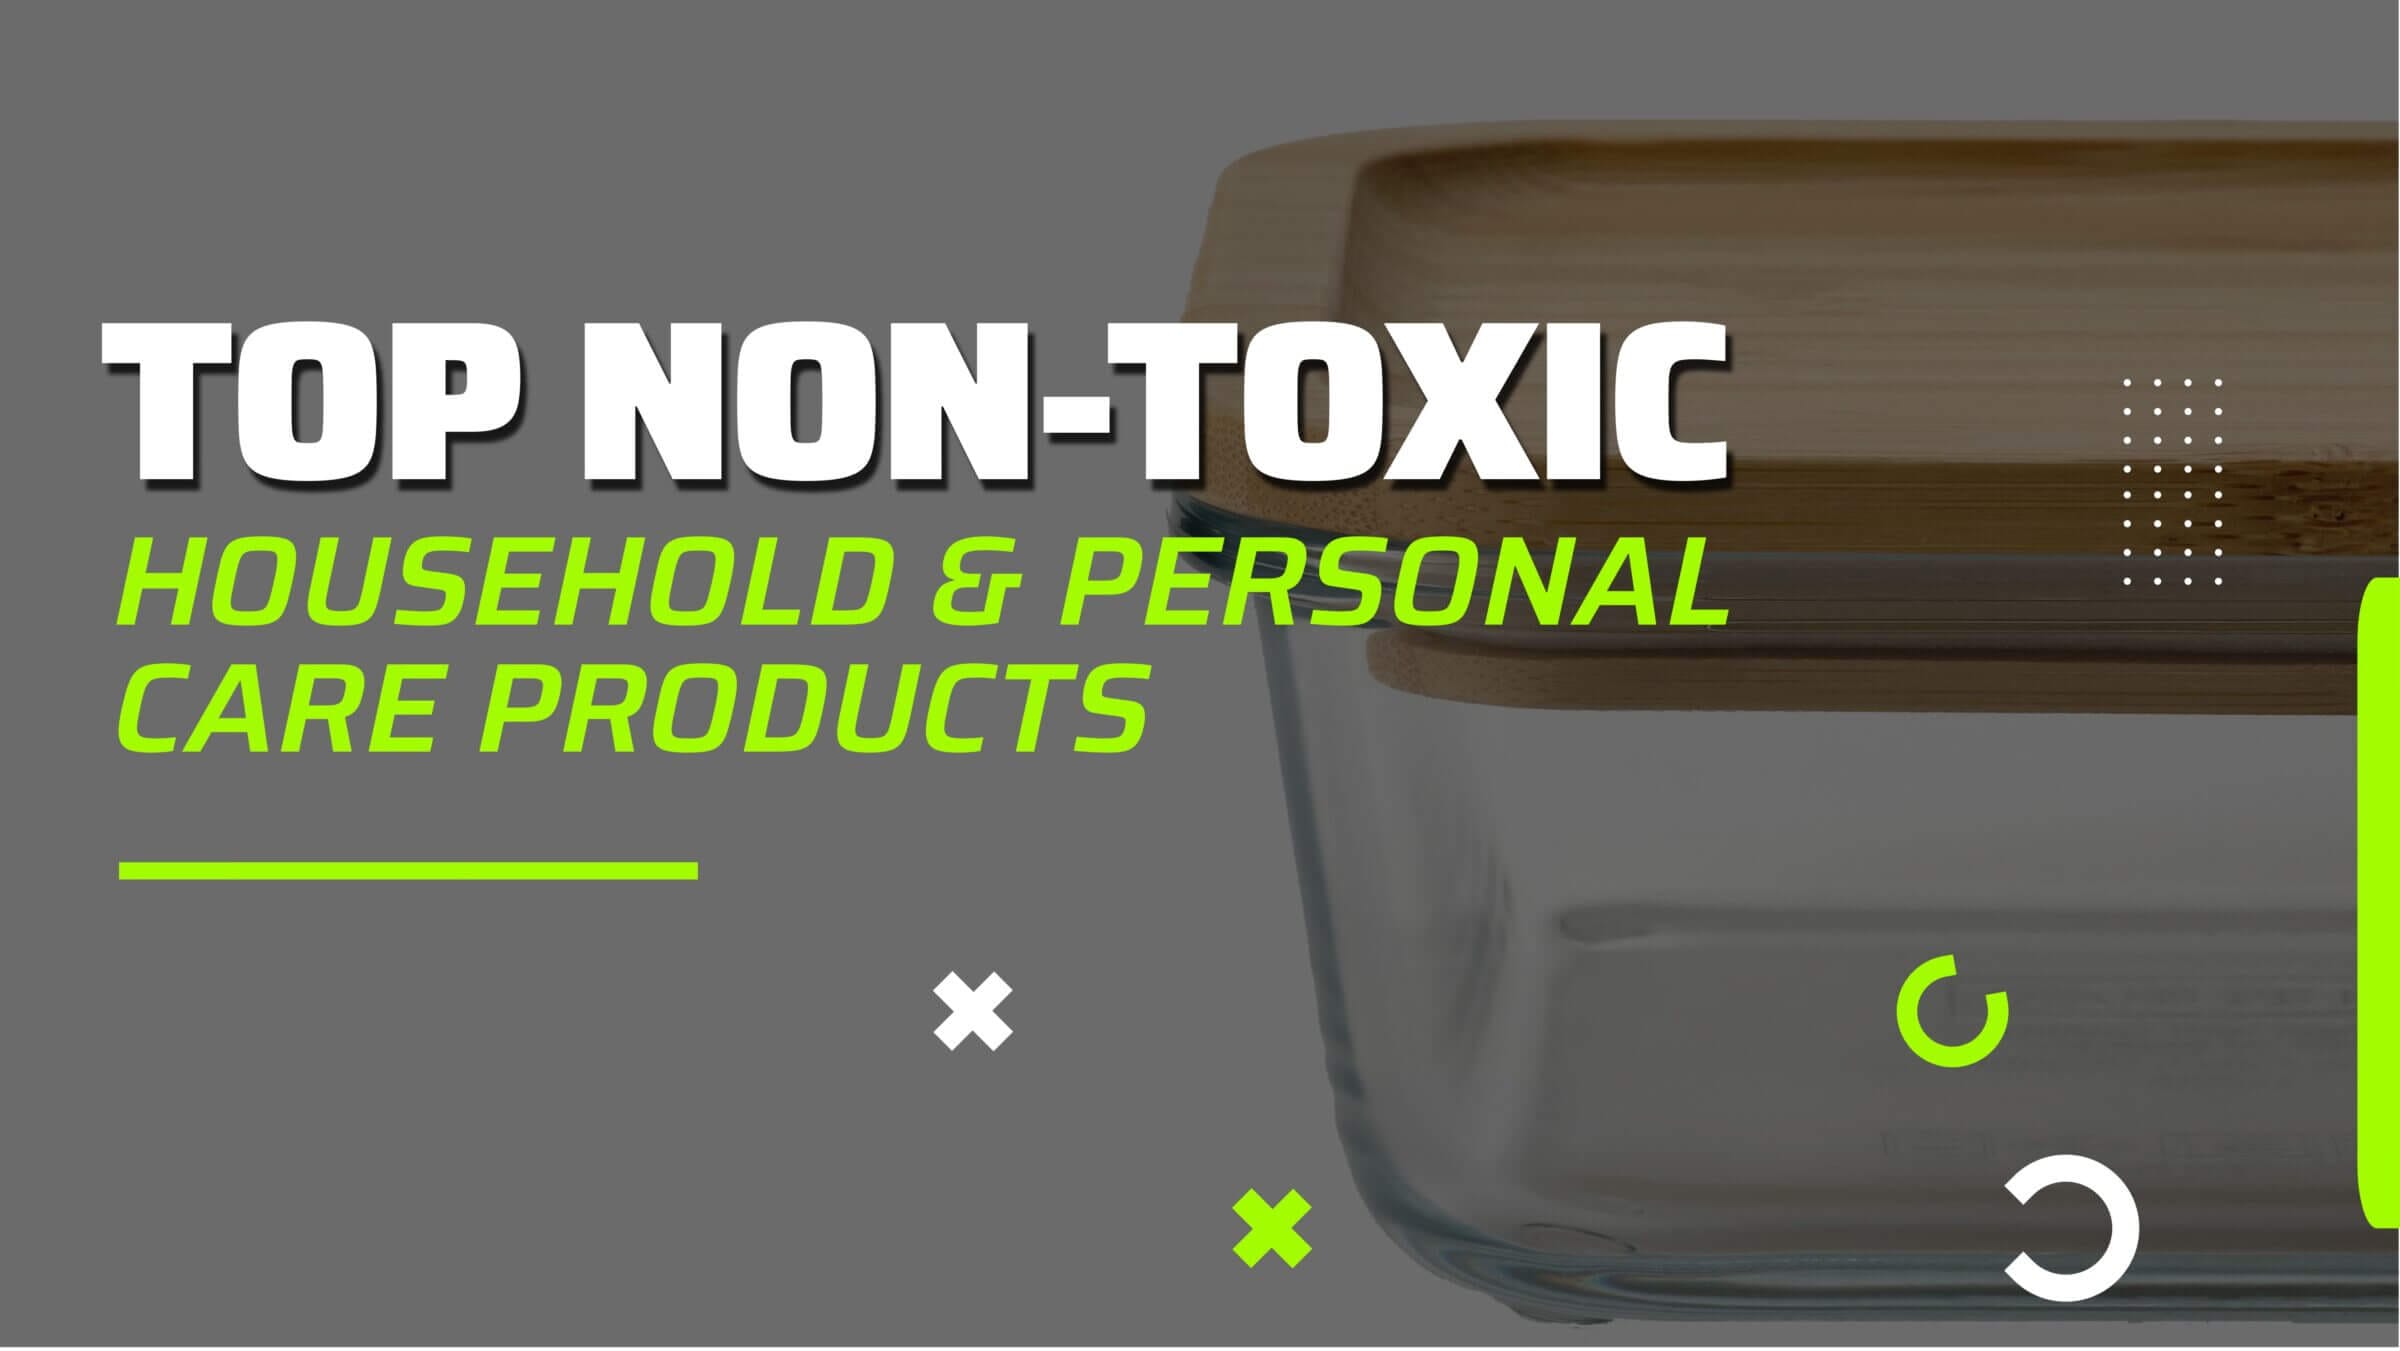 Top non-toxic household and personal care products